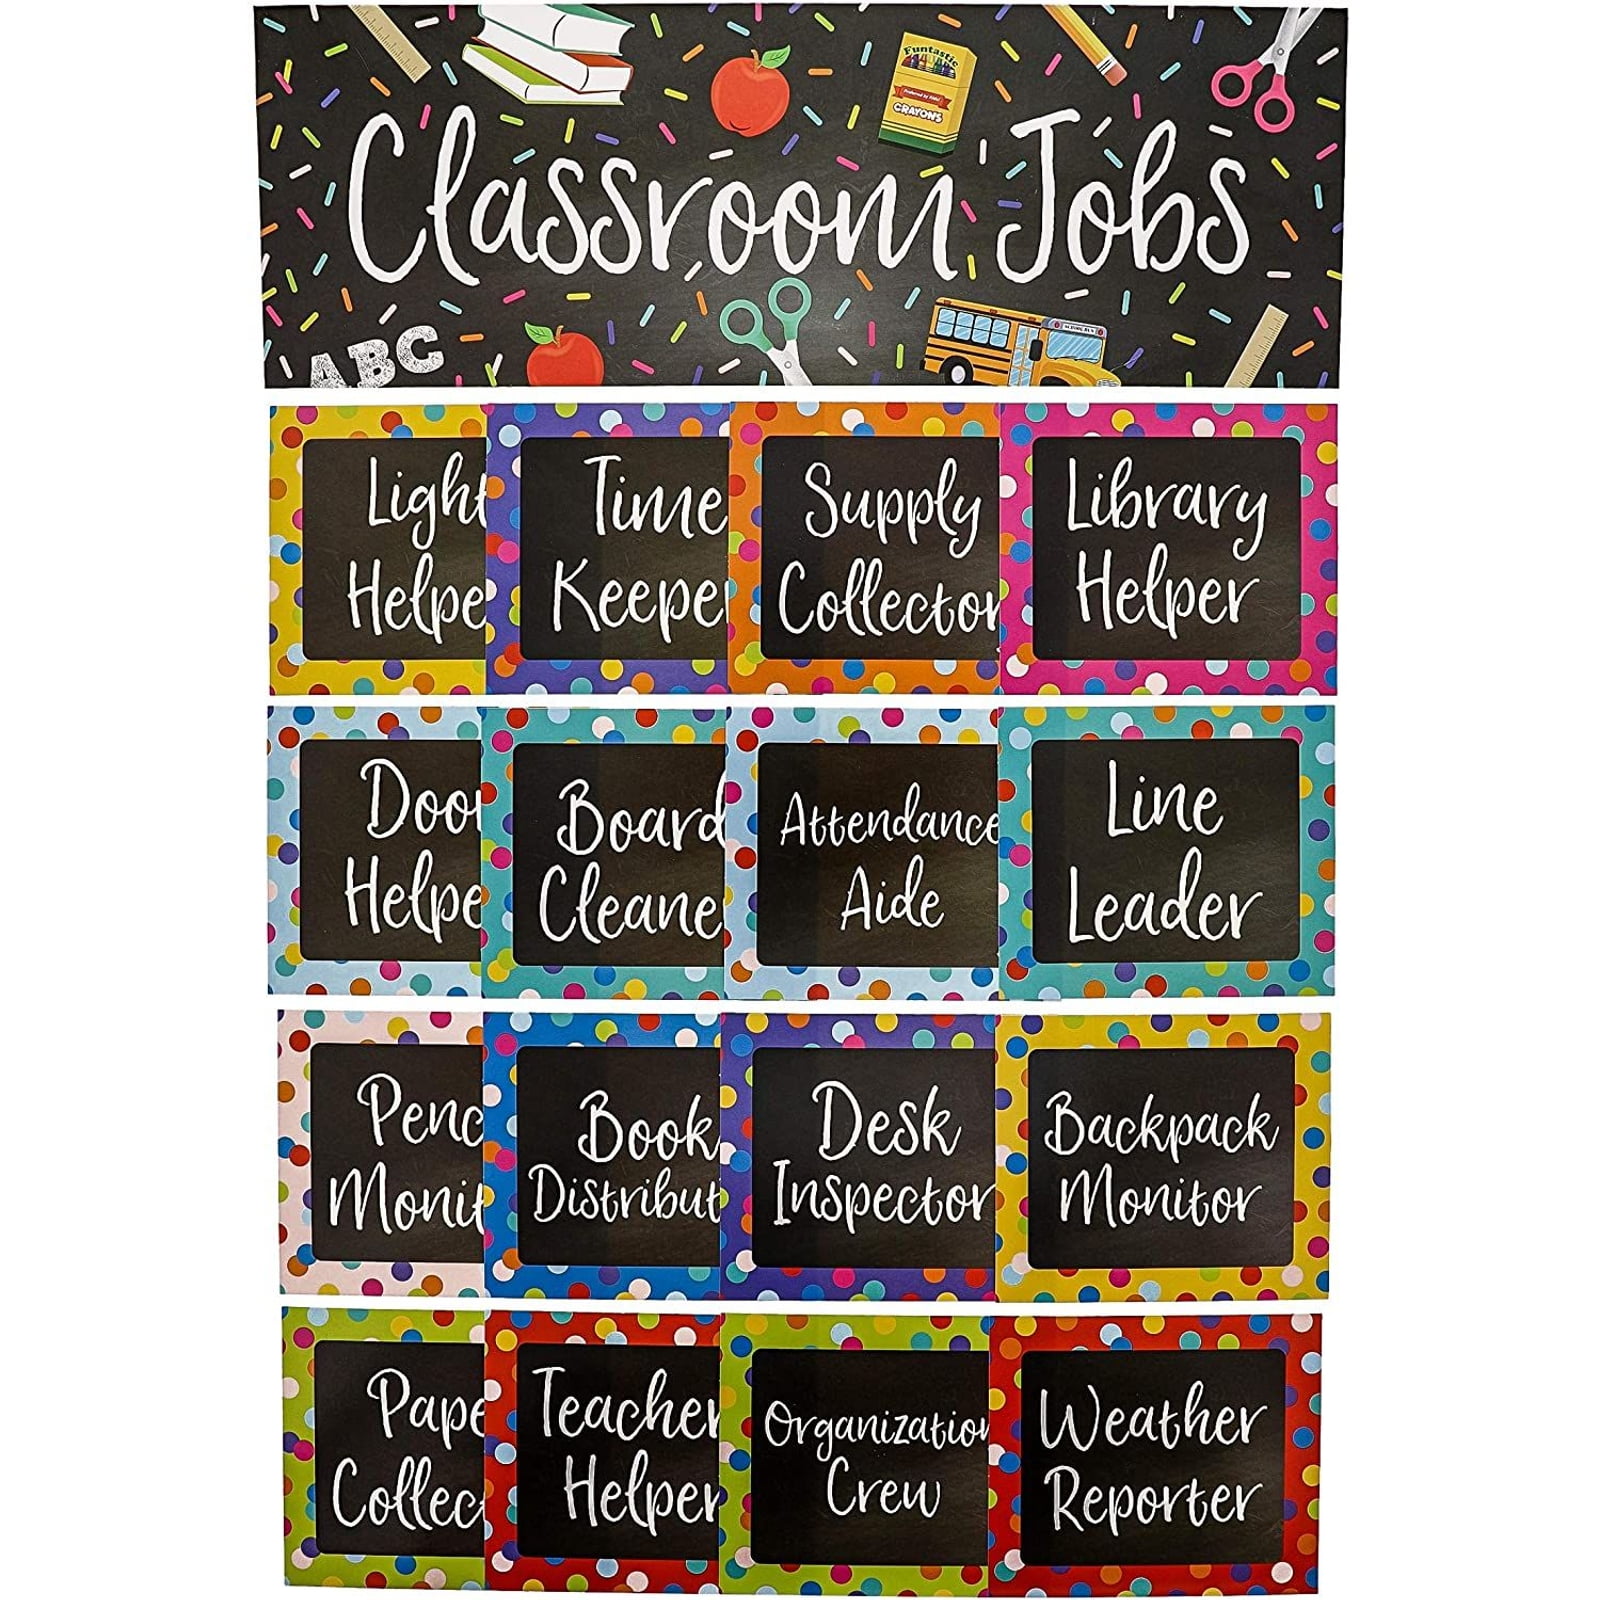 Juvale 17-Piece Chalkboard Design Classroom Jobs Chart Set for Bulletin Board and 50 Blank Name Tags 